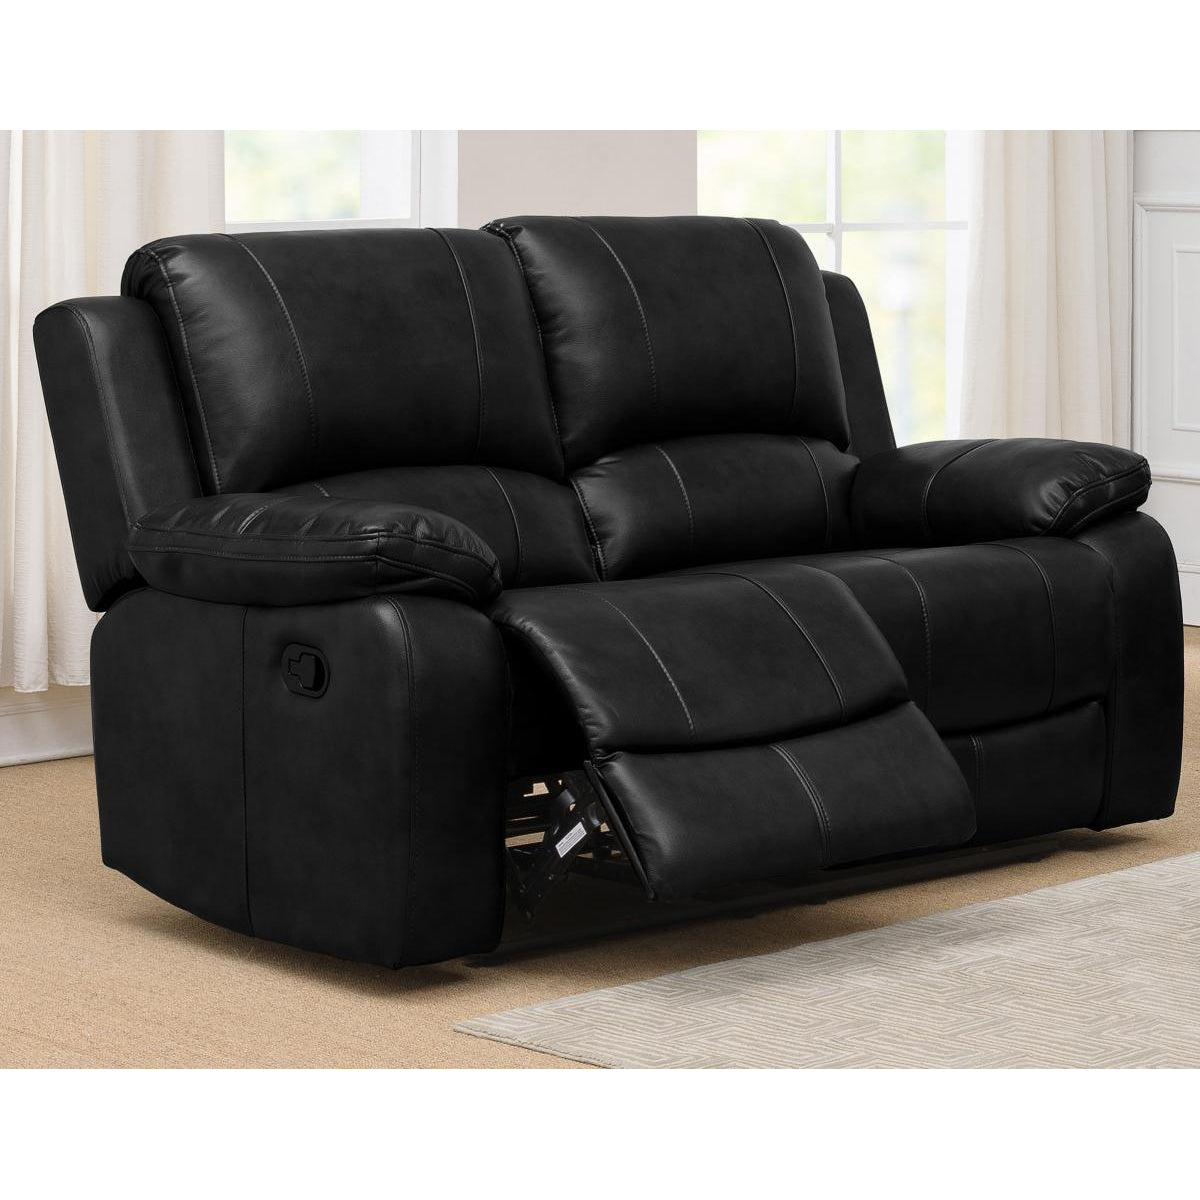 Andalusia Recliner Leathergel And PU 2 Seater Black